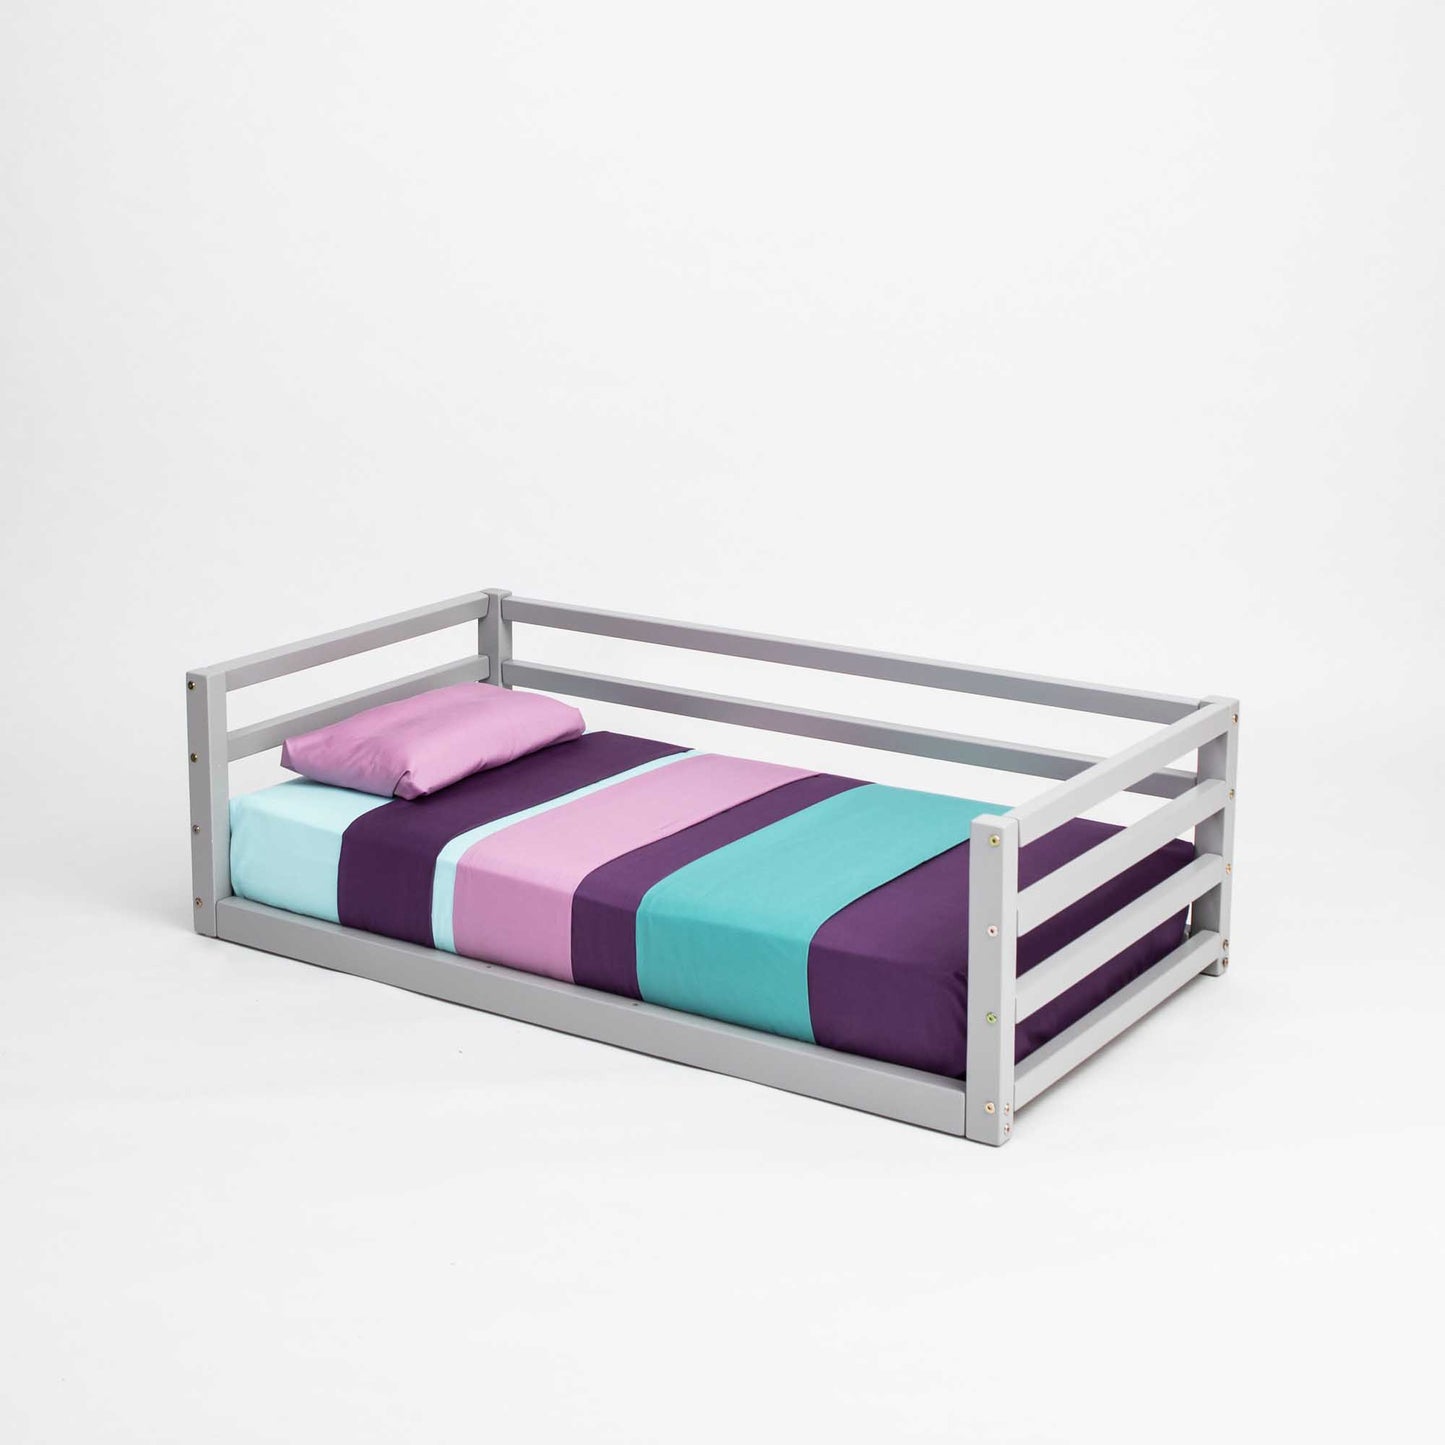 A Children's floor level bed with 3-sided safety rail by Sweet Home From Wood, with a purple, blue, and green striped sheet that is suitable for both boys and girls.